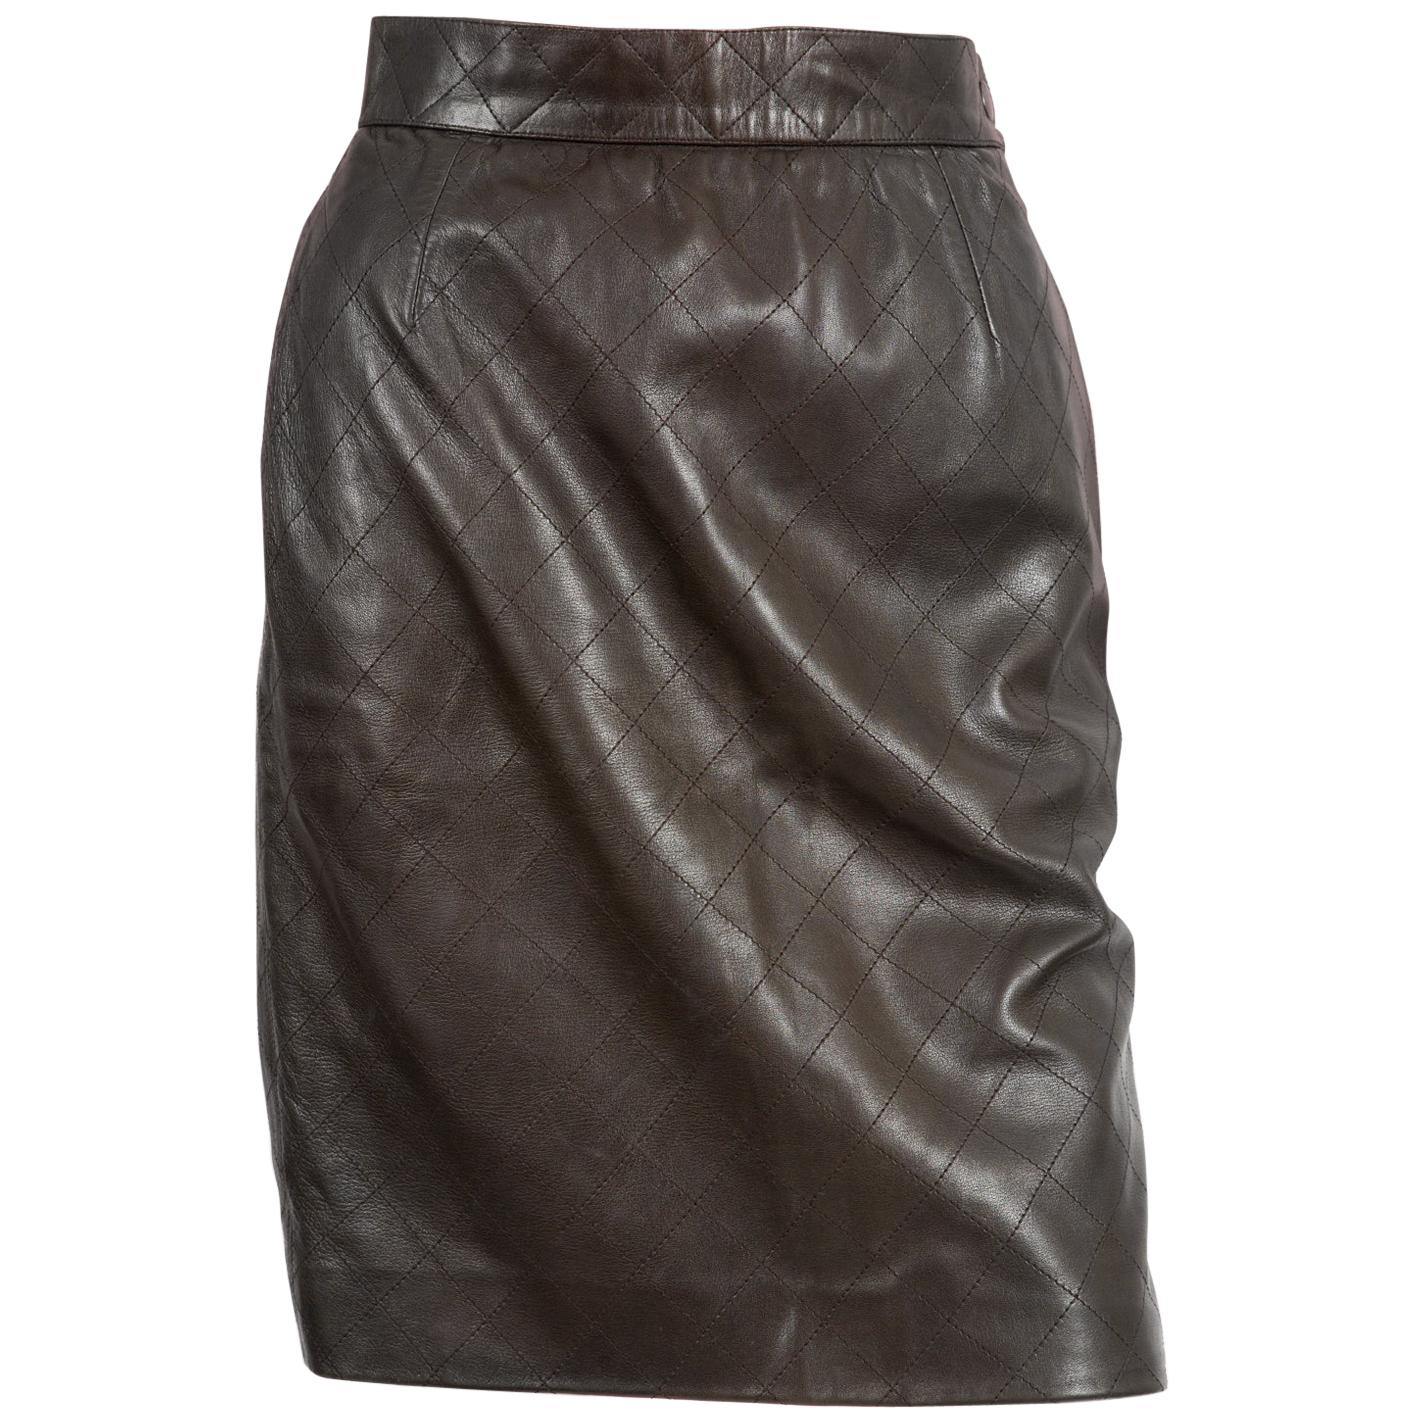 Yves Saint Laurent Chocolate Lamb Leather Quilted Pencil Skirt